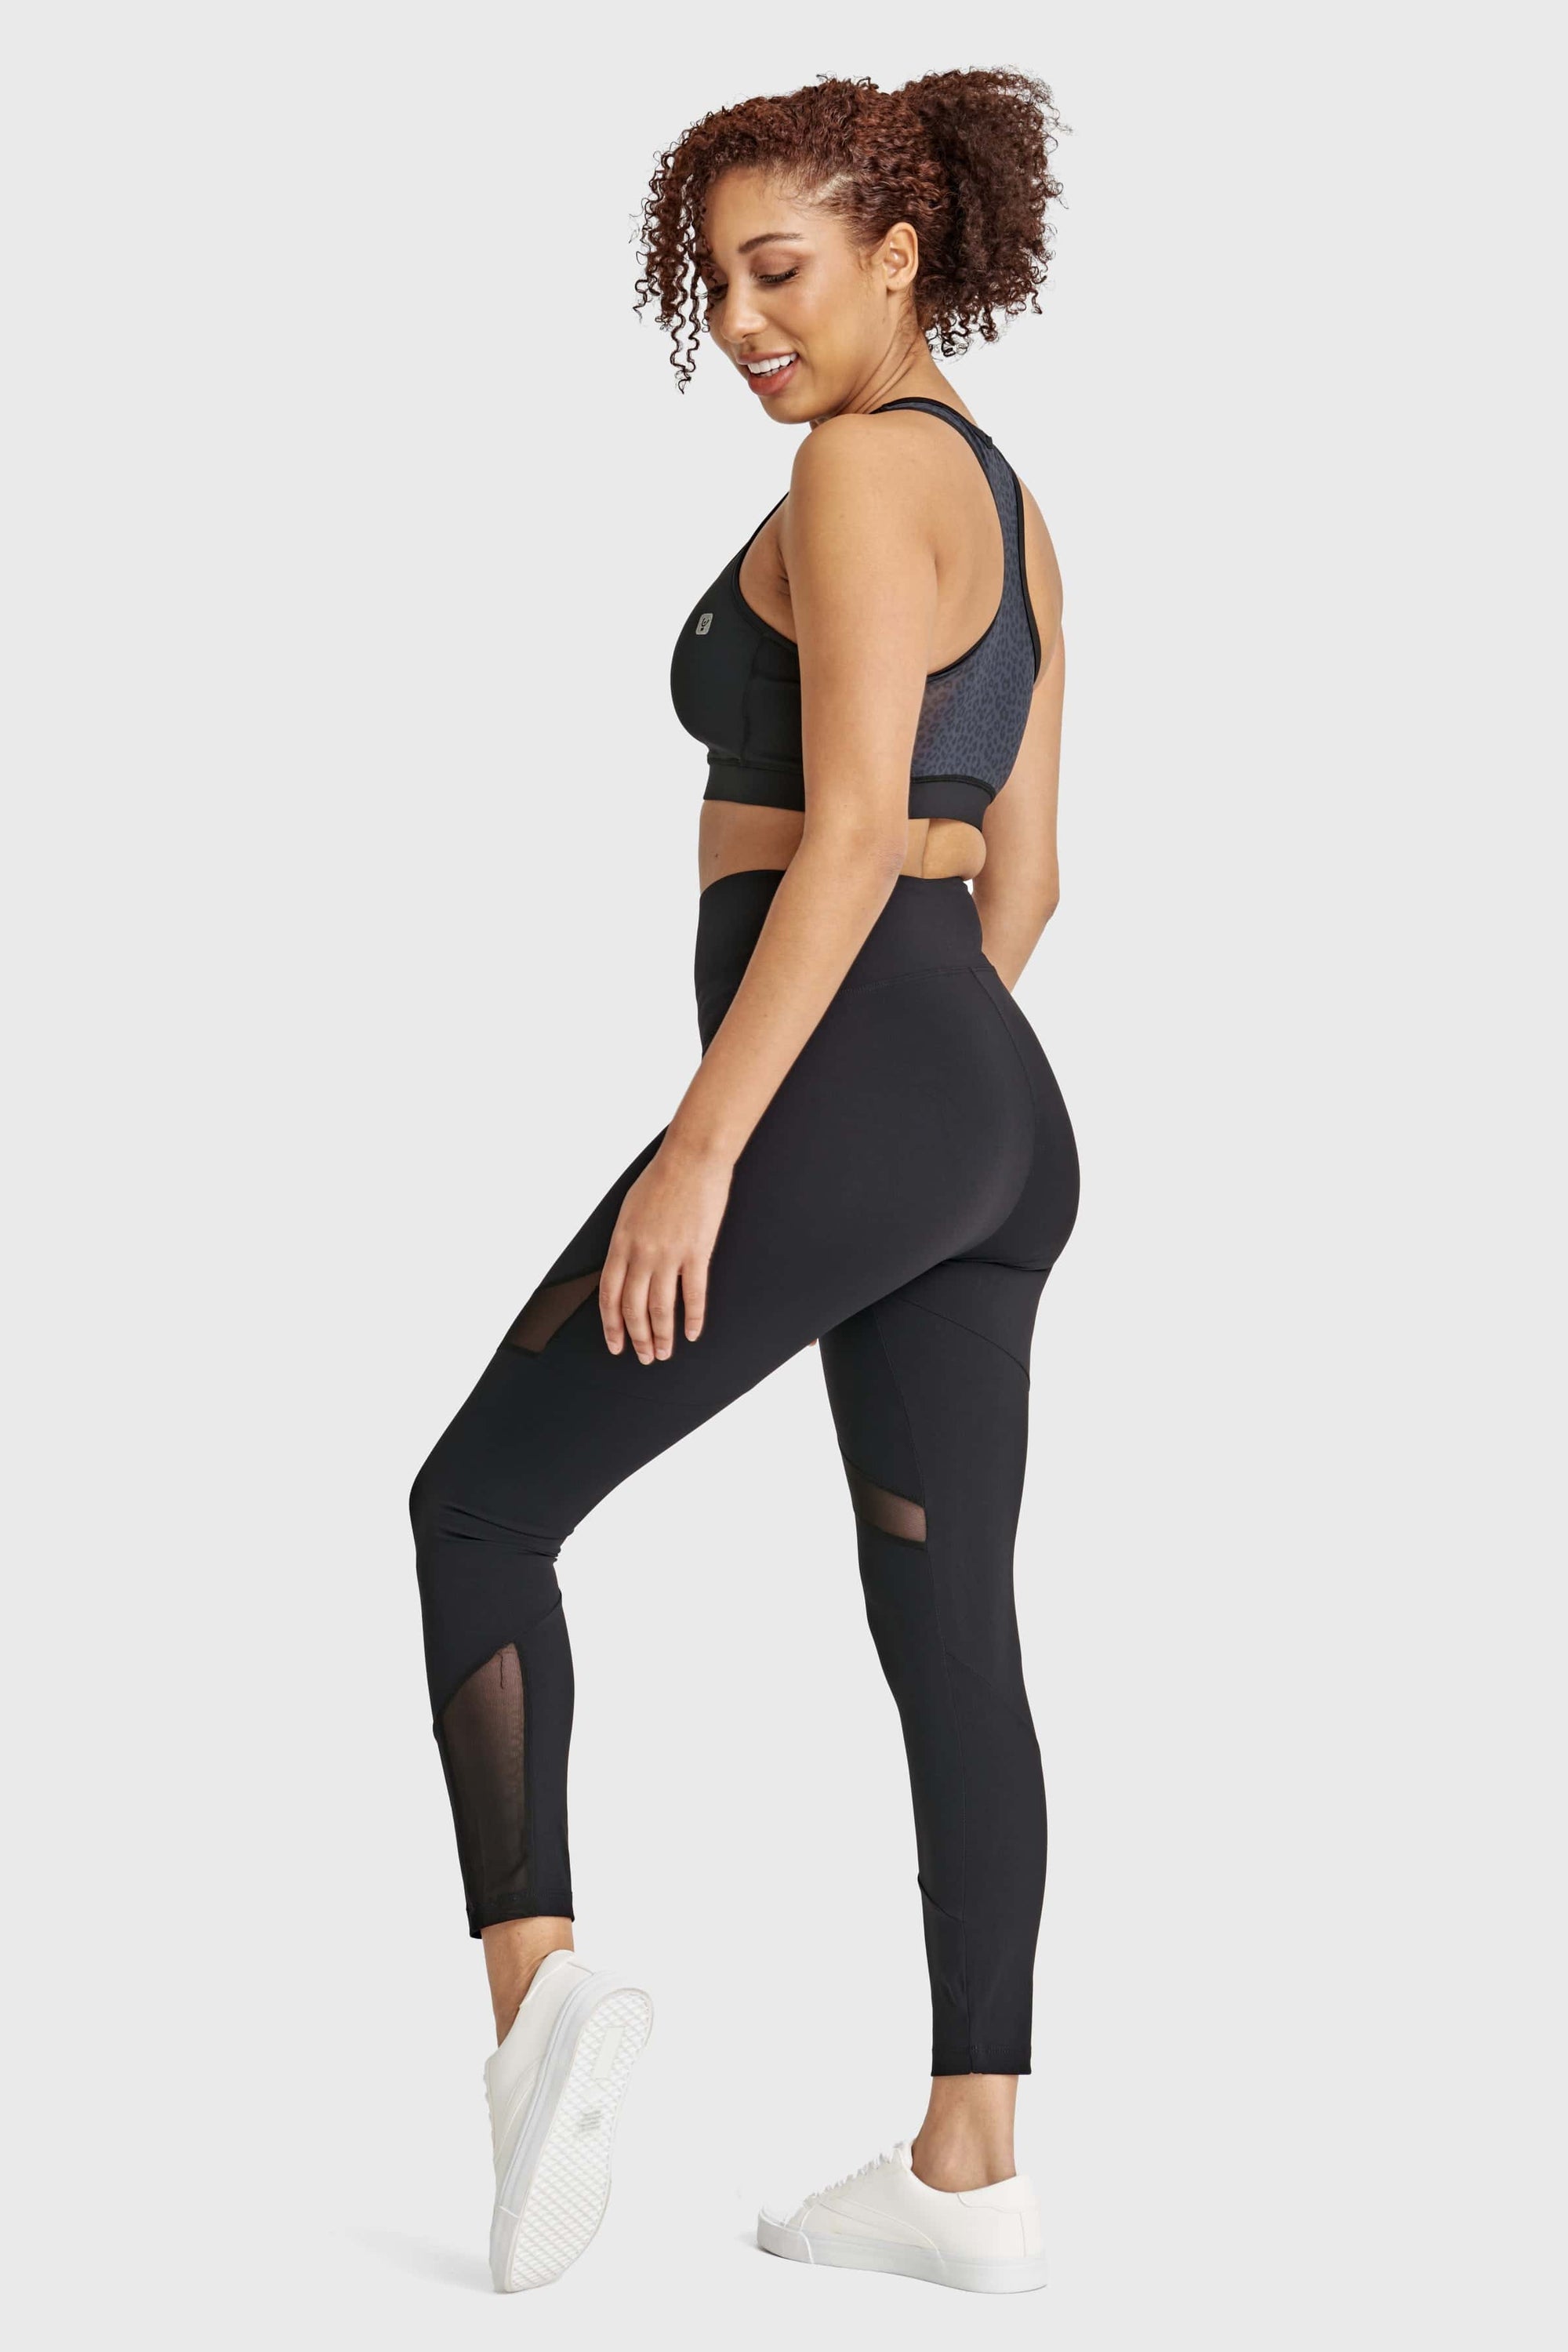 Superfit Diwo Pro With Mesh Detailing - High Waisted - Petite Length - Black 7